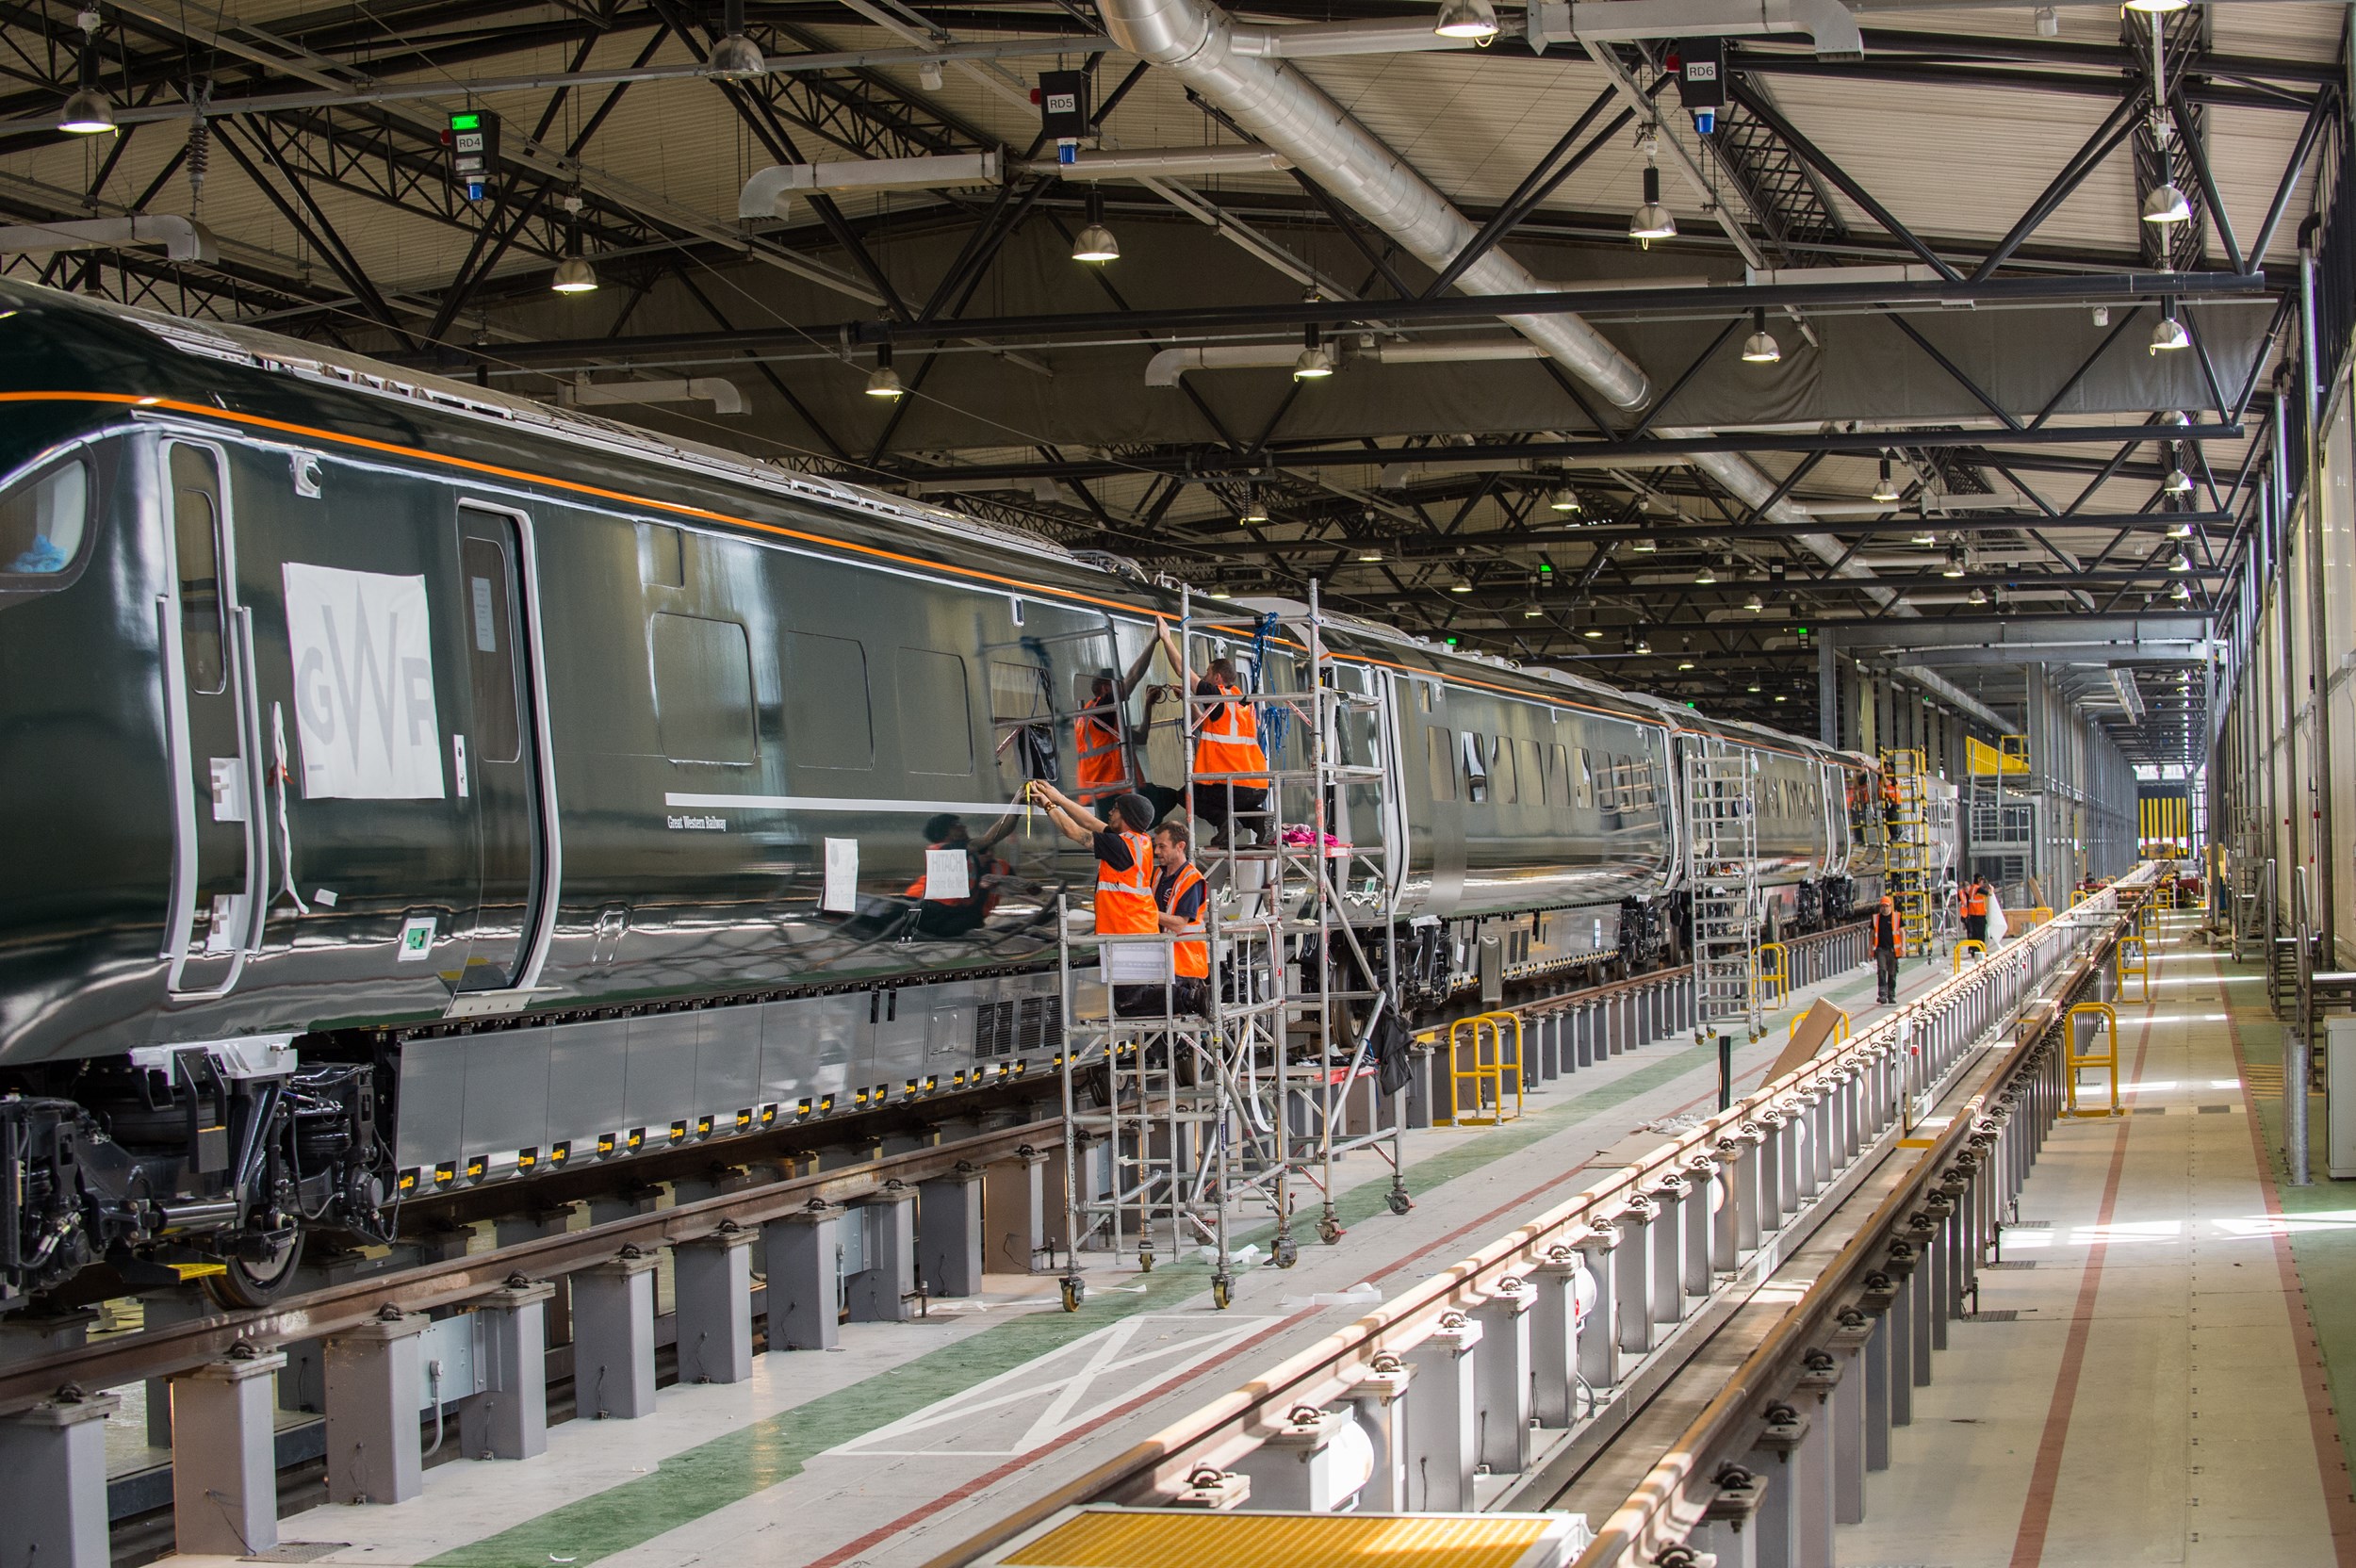 EXCLUSIVE: GWR Class 800 wrapped